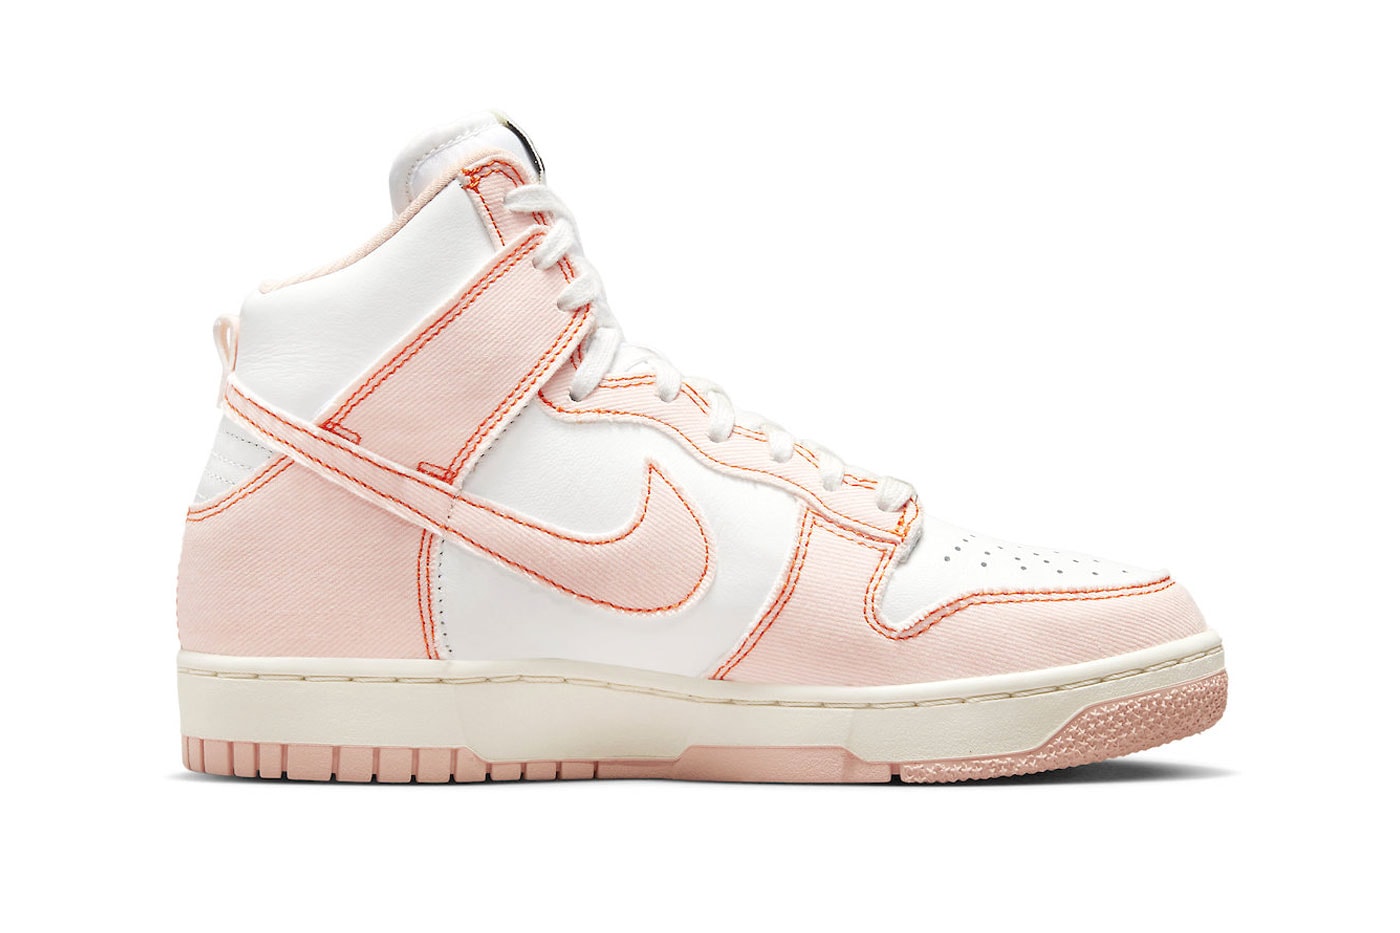 Take a Look at the Official Images of the Nike Dunk High 1985 "Arctic Orange" DV1143-800 vintage